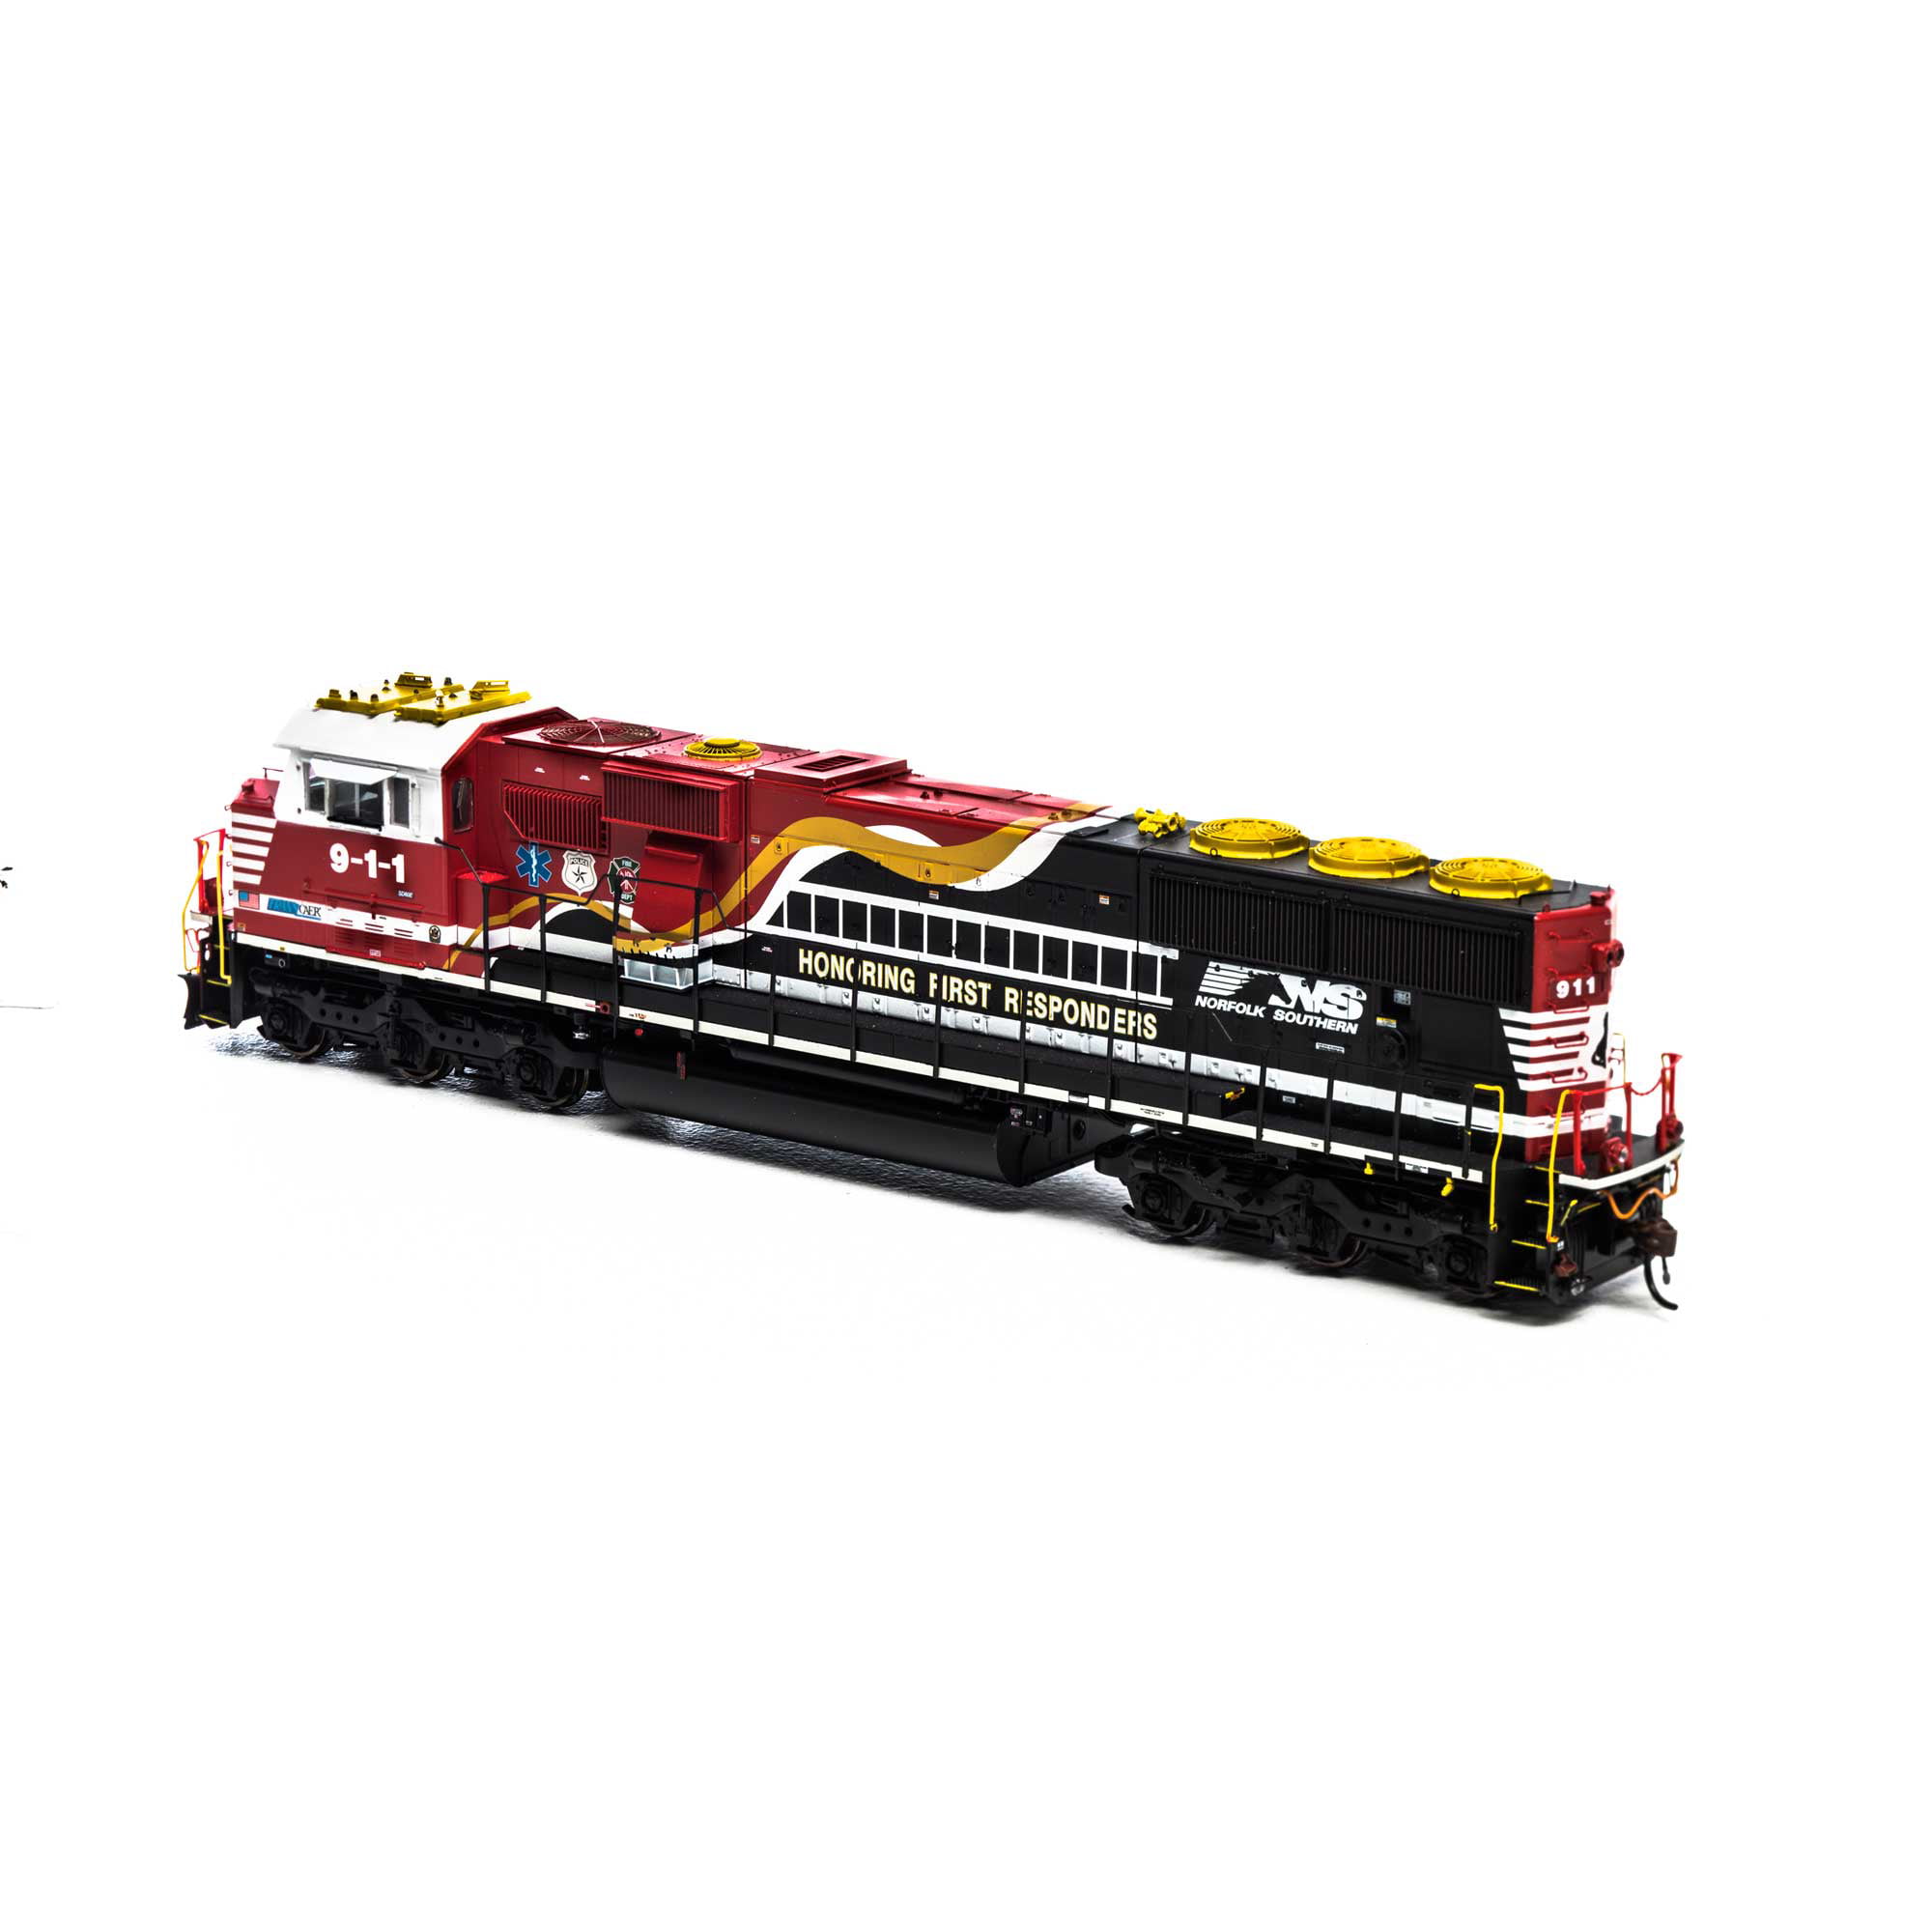 Athearn Genesis HO Sd60e Norfolk Southern ATHG65250 First Responder 911 Last One for sale online 